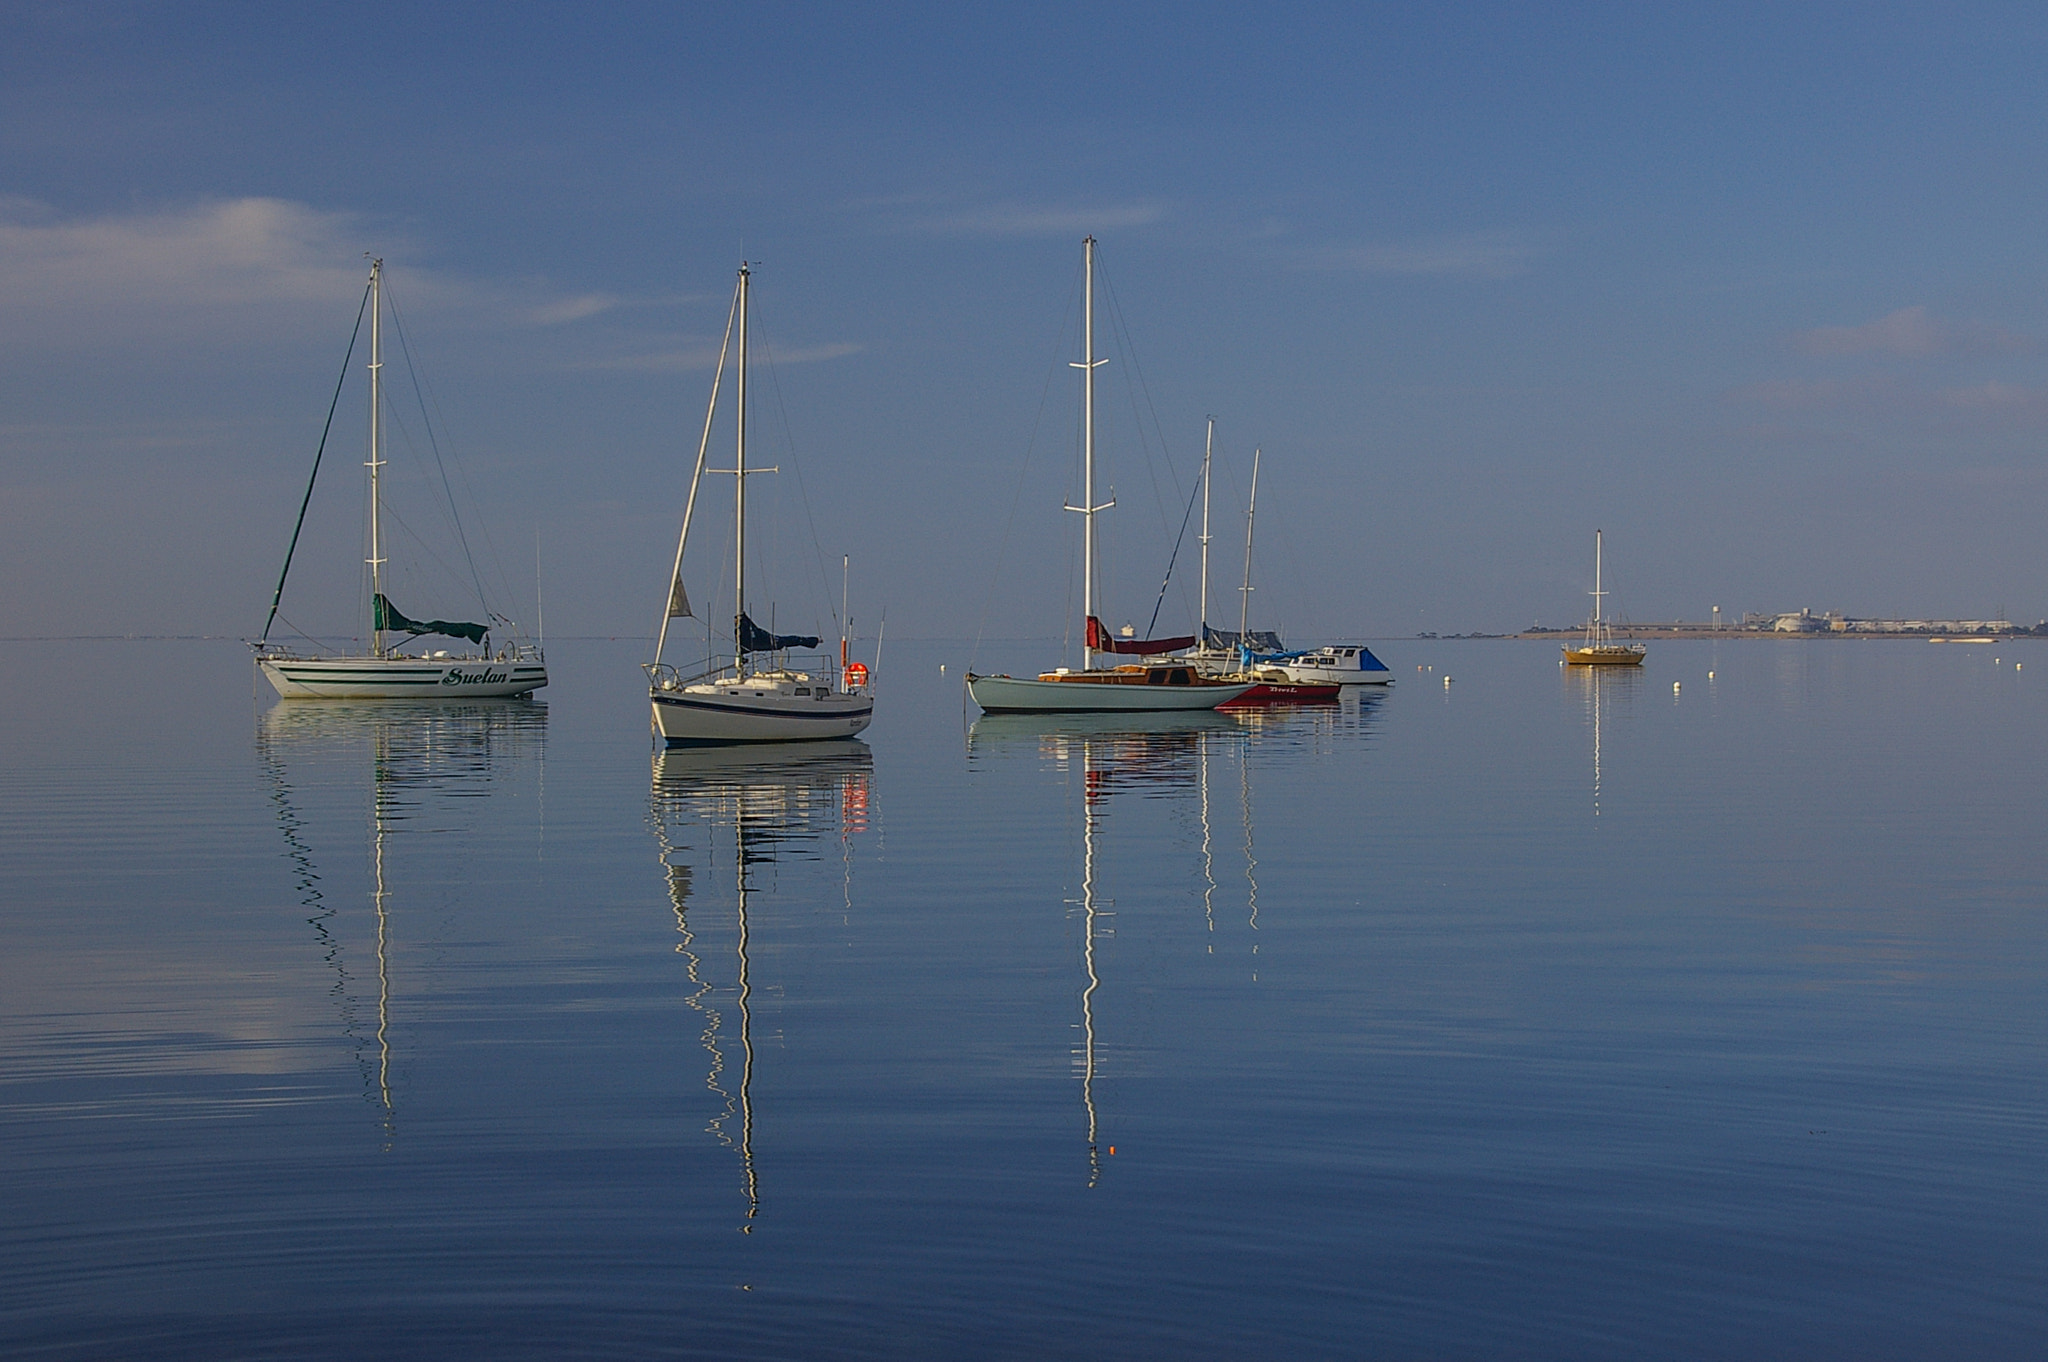 Pentax *ist DS sample photo. Reminiscing about the calmness on corio bay photography